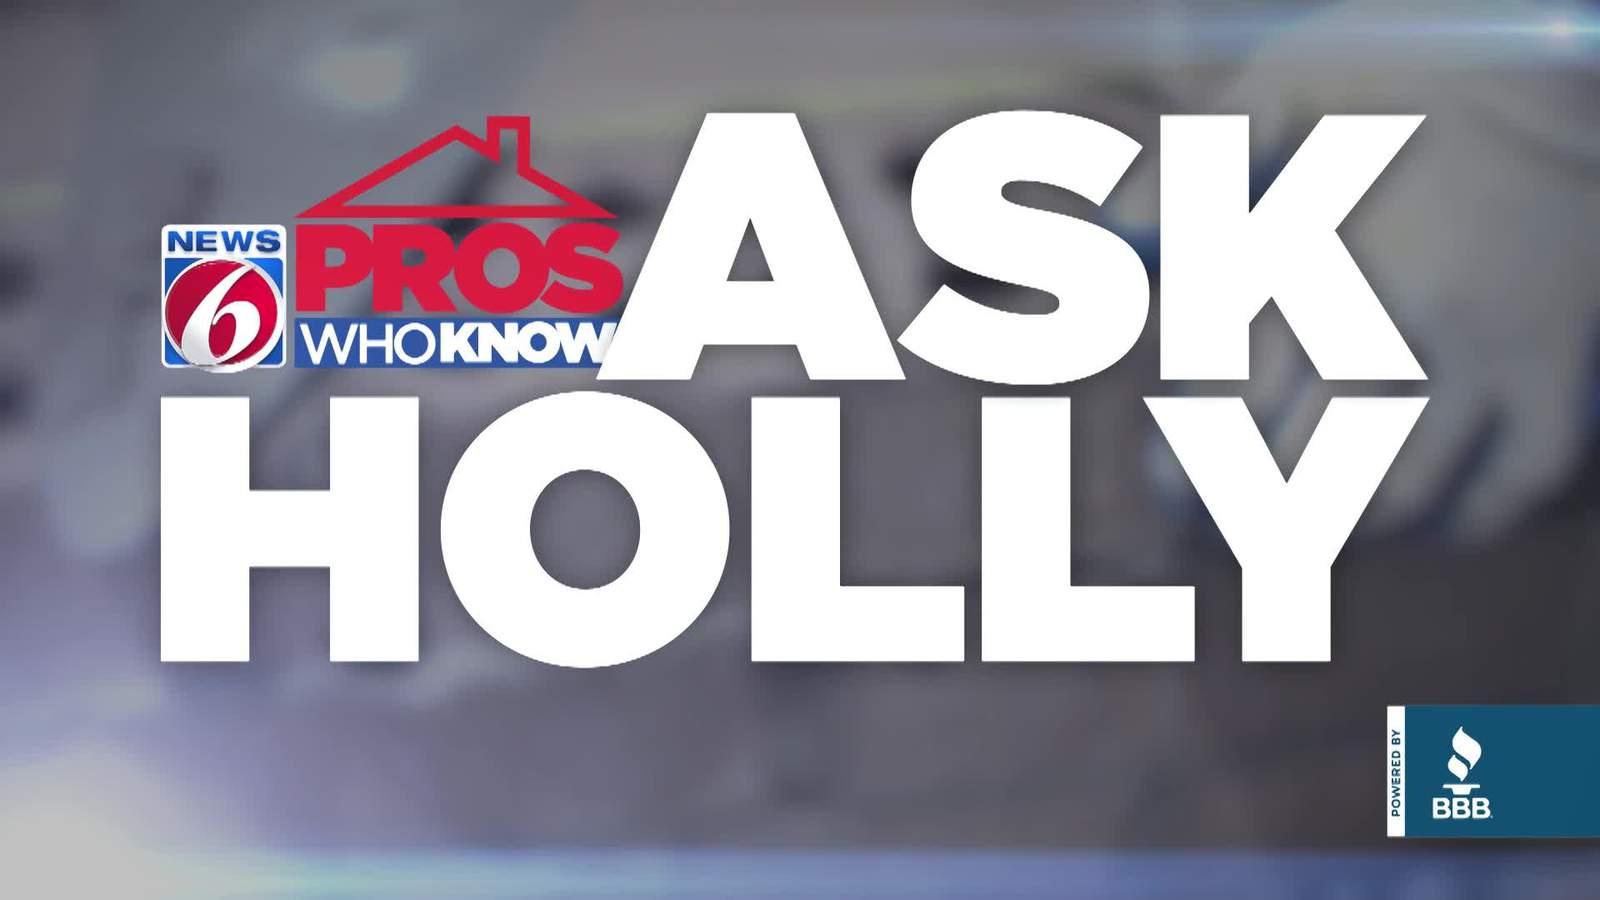 Ask Holly: Any advice on home improvement projects?